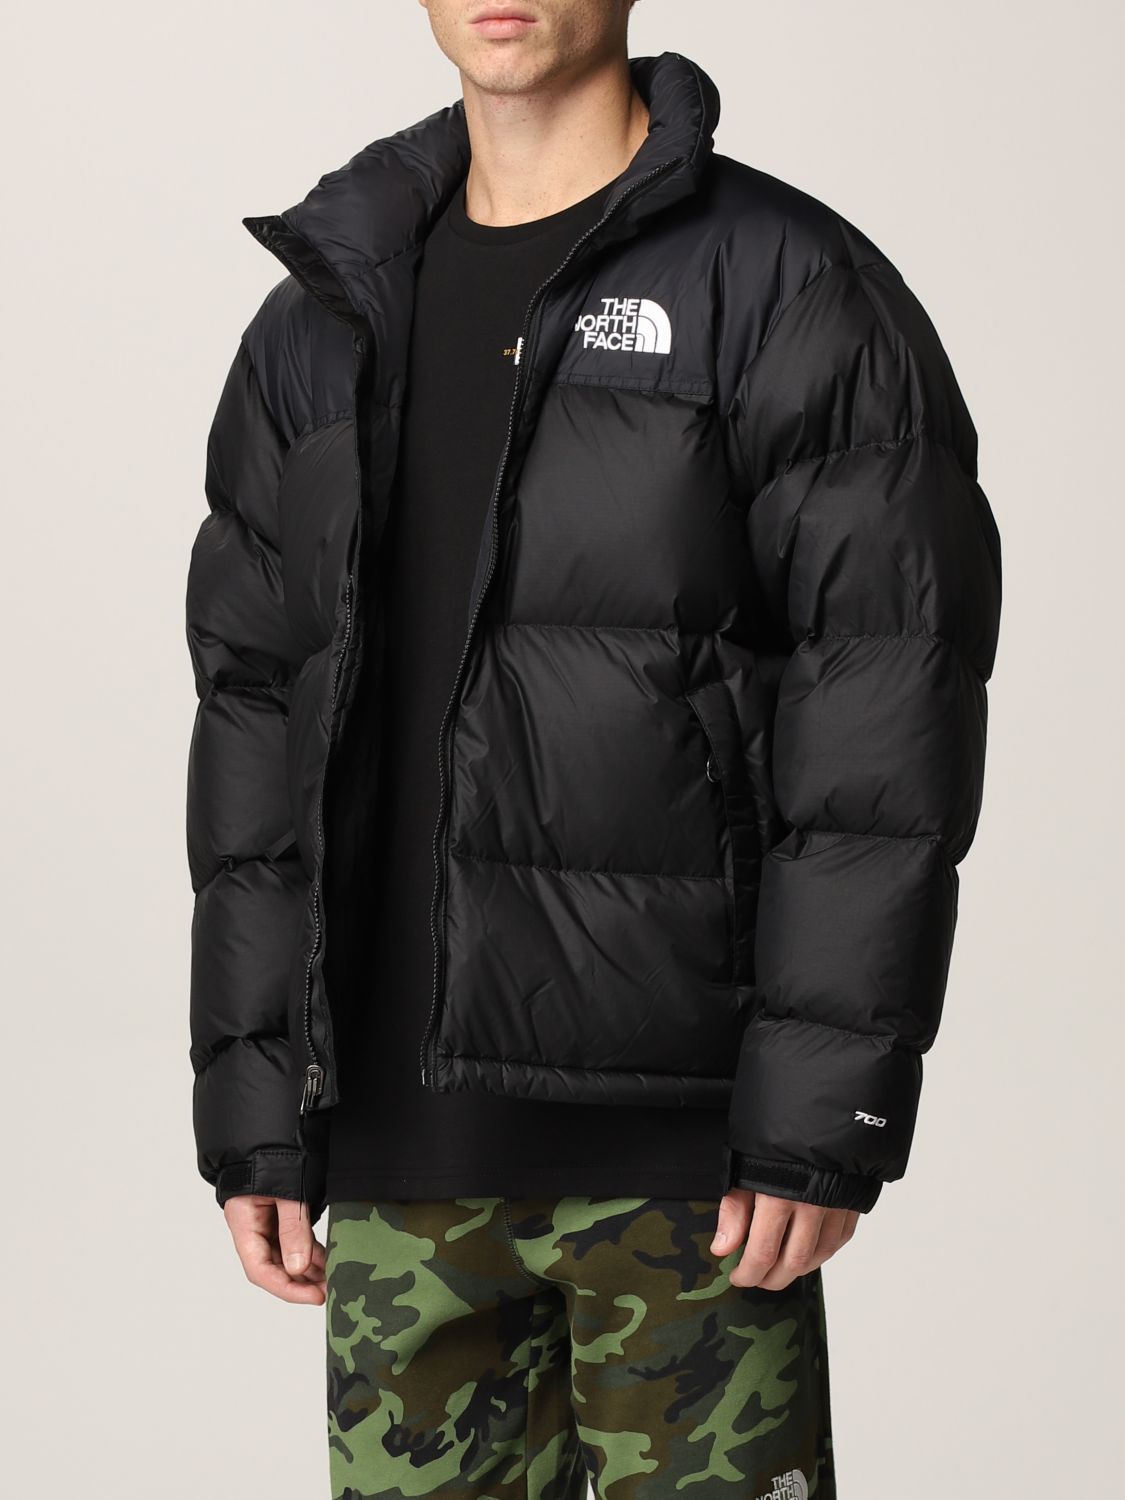 THE NORTH FACE: Jacket men - Black | Jacket The North Face NF0A3C8DLE41 ...